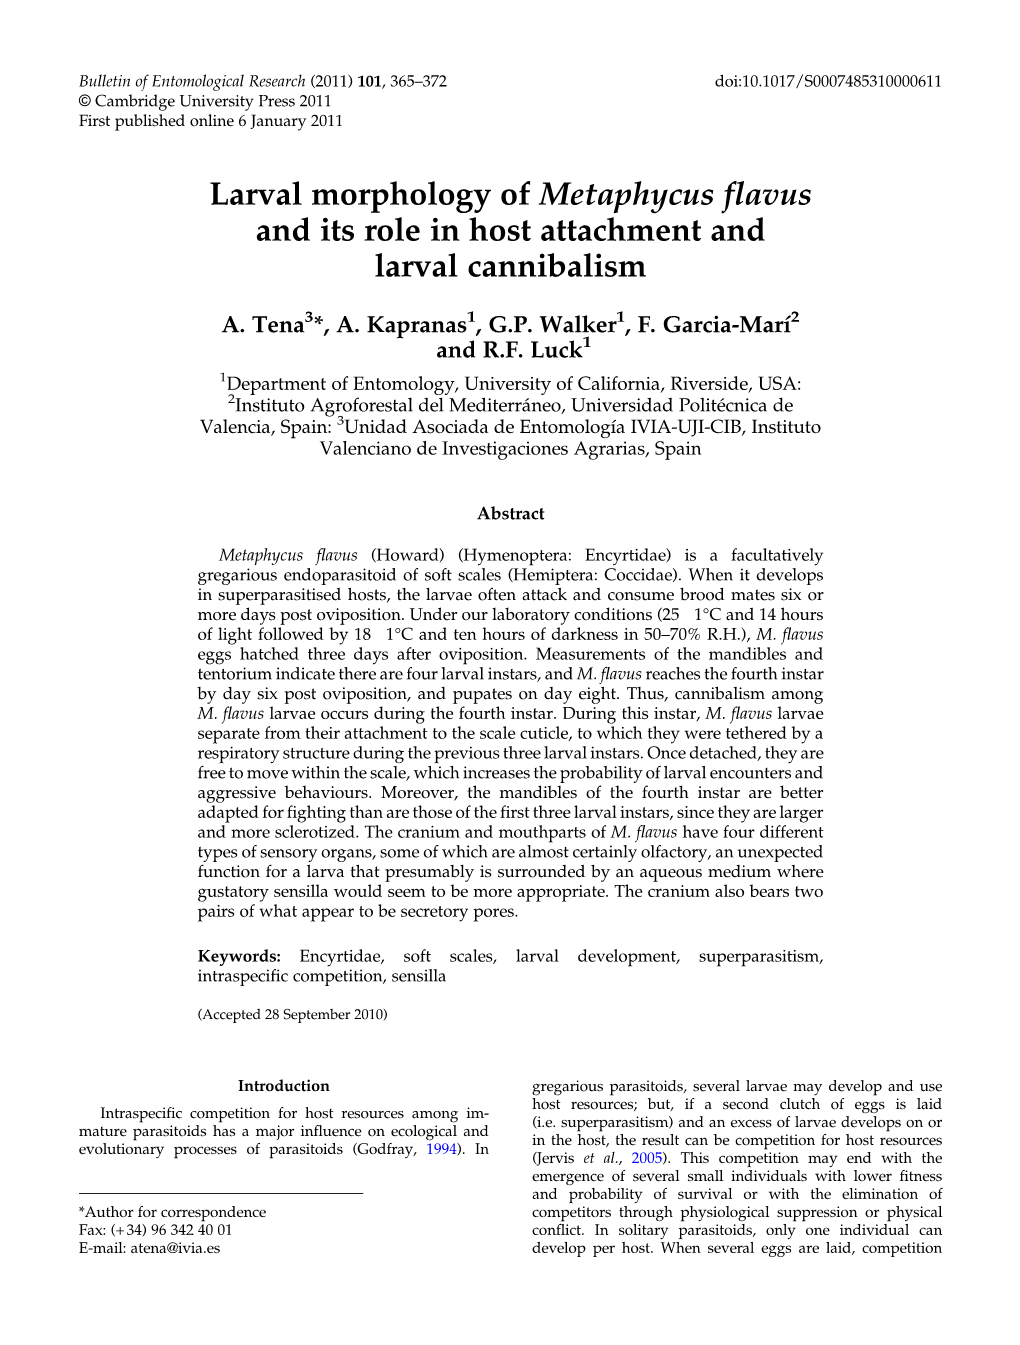 Larval Morphology of Metaphycus Flavus and Its Role in Host Attachment and Larval Cannibalism